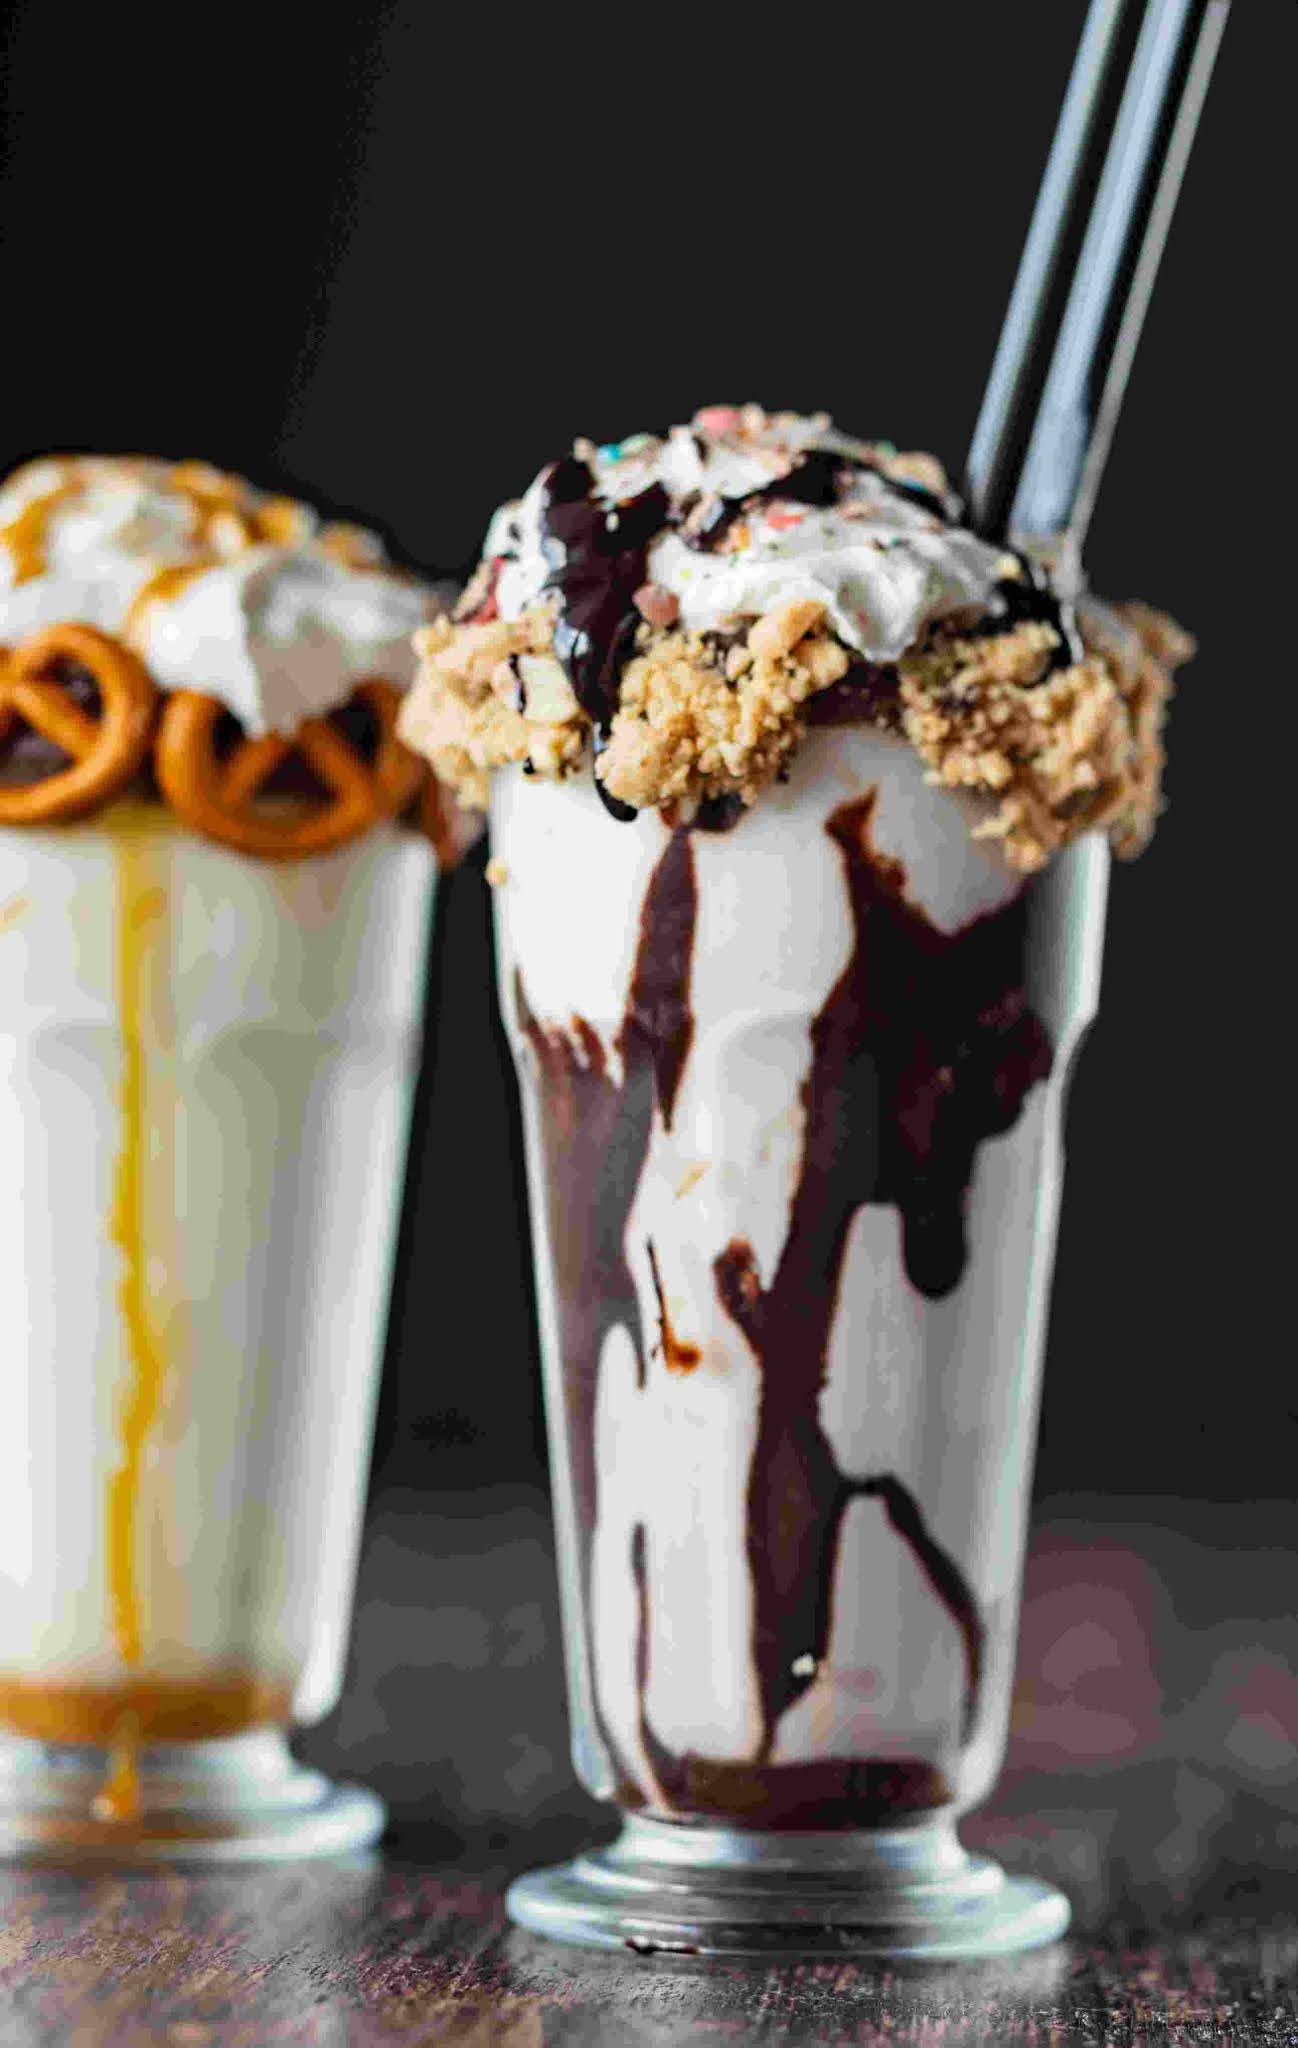 Chocolate shake captions and quotes for Instagram, chocolate captions, dark chocolate flavours